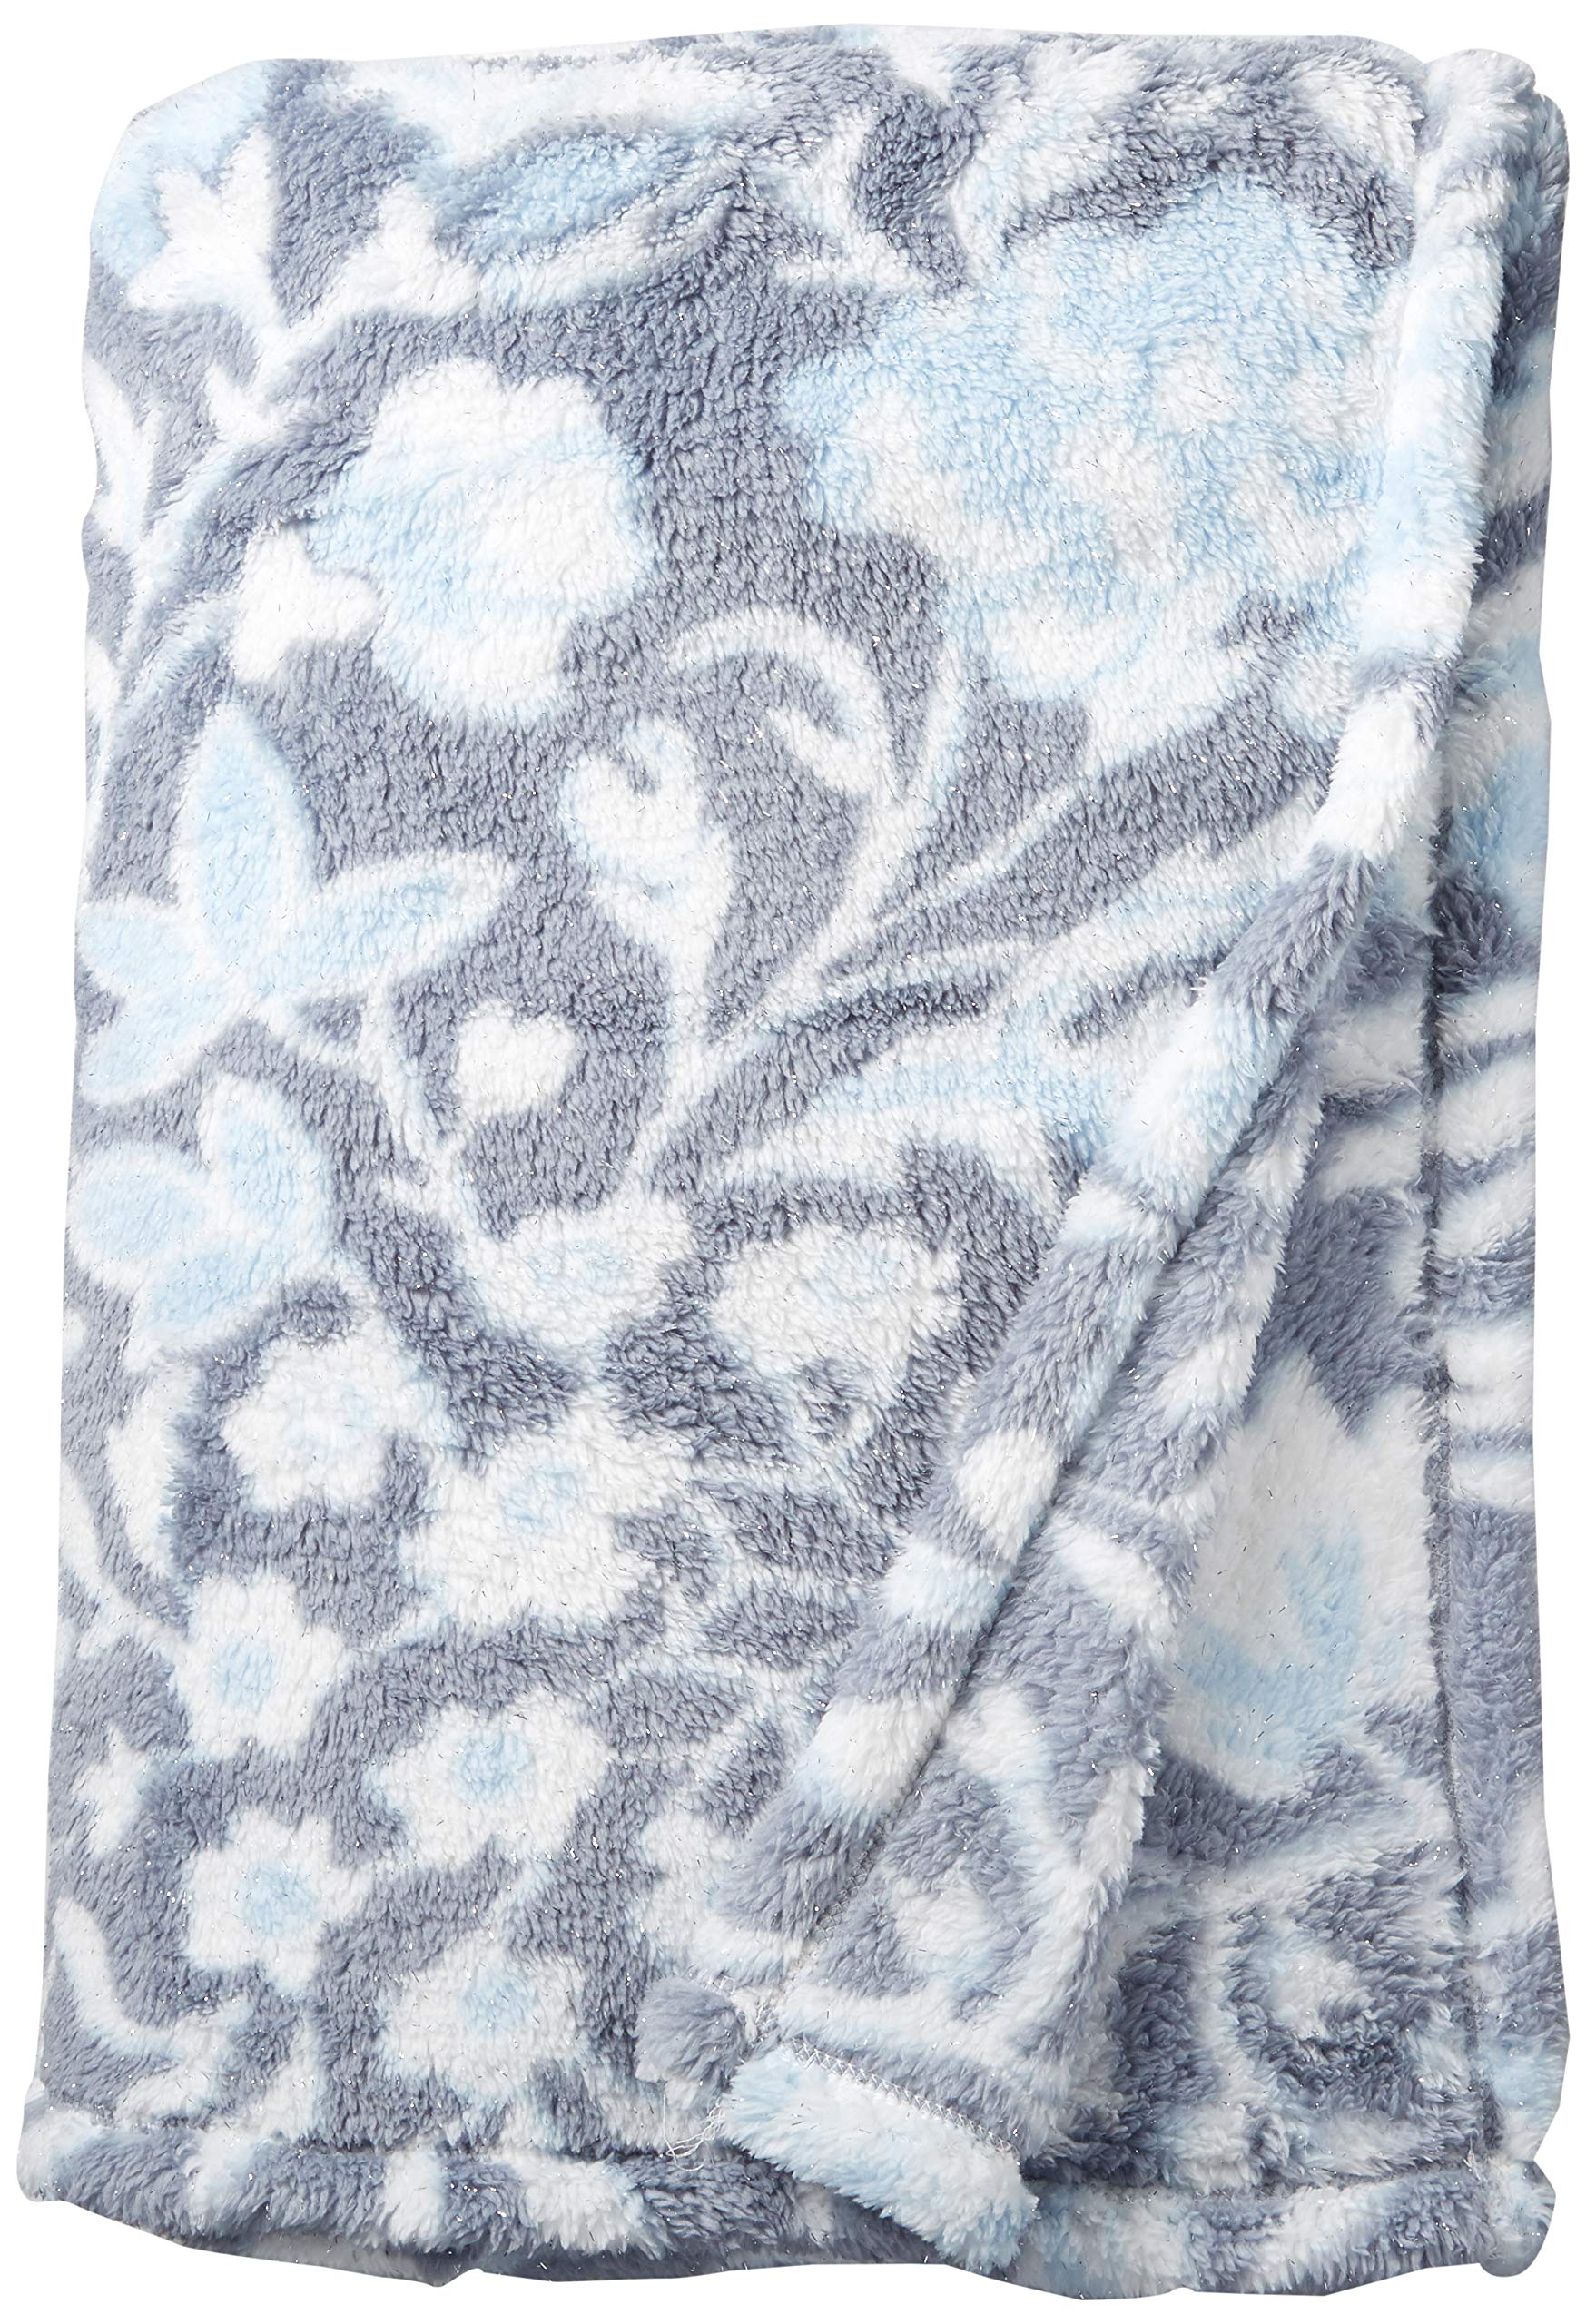 Vera Bradley womens Fleece Plush Shimmer Throw Blanket D cor, Frosted Lace, 80 x 50 US